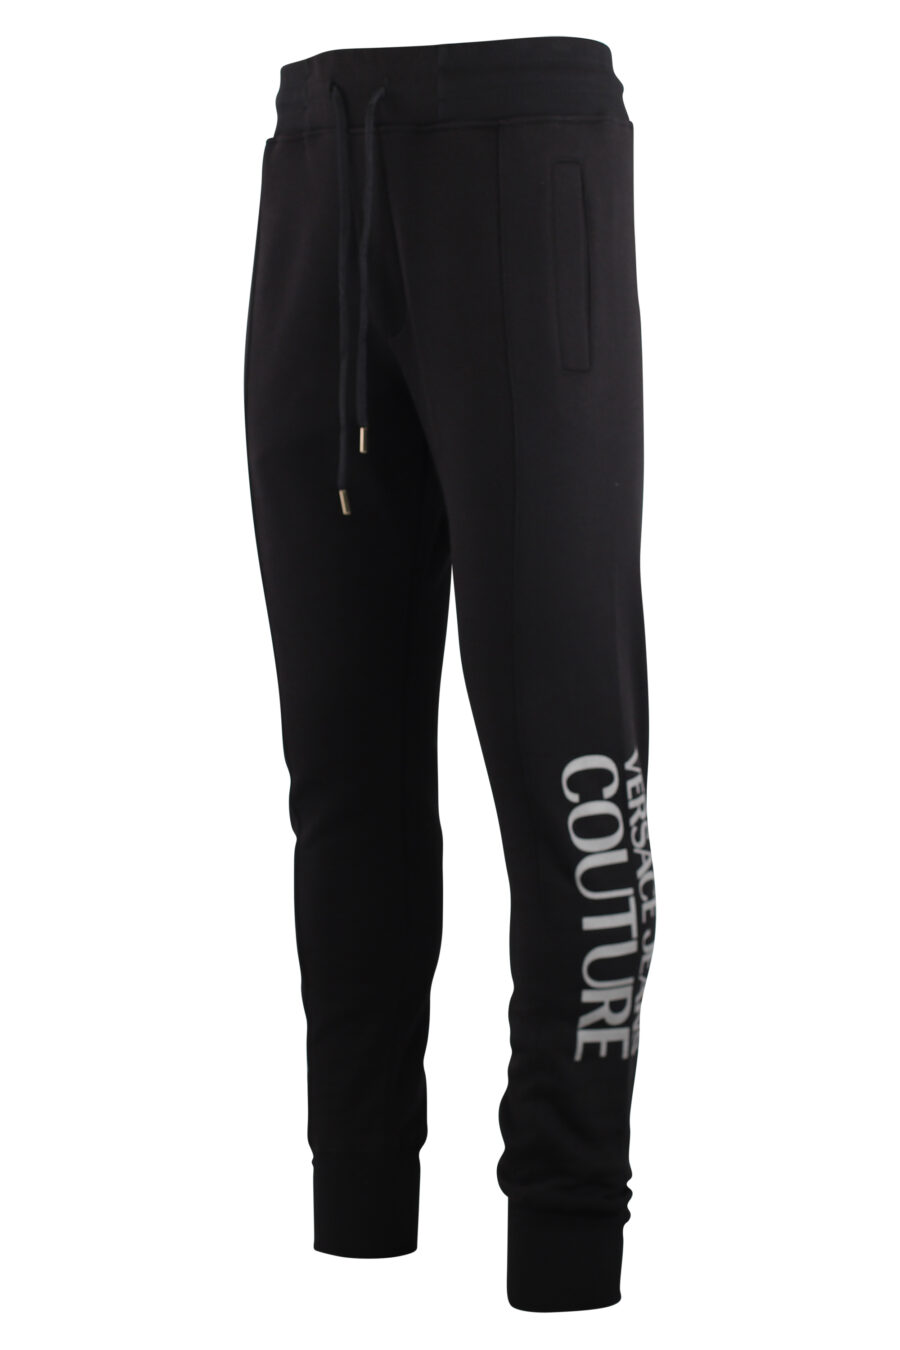 Tracksuit bottoms black with silver vertical logo - IMG 7502